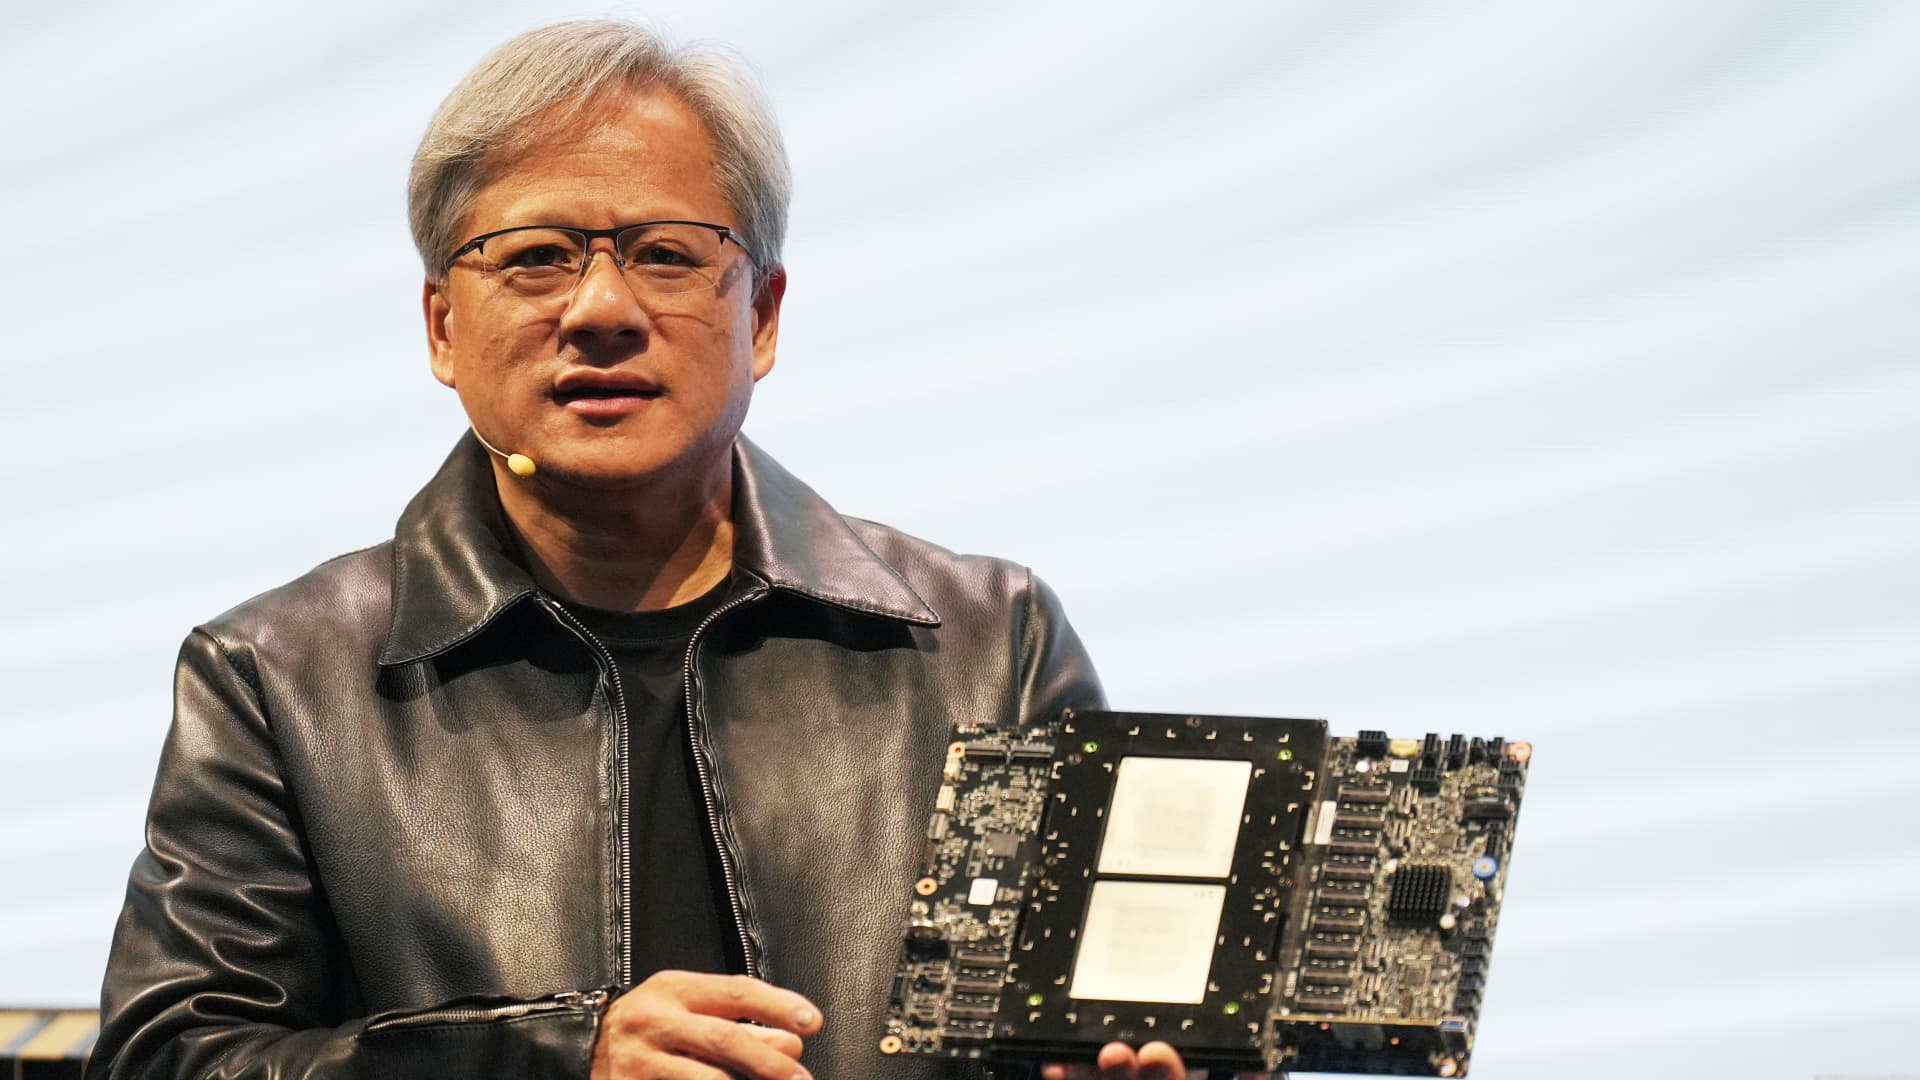 Jensen Huang, president of Nvidia, holding the Grace hopper superchip CPU used for generative AI at the Supermicro keynote presentation during Computex 2023.